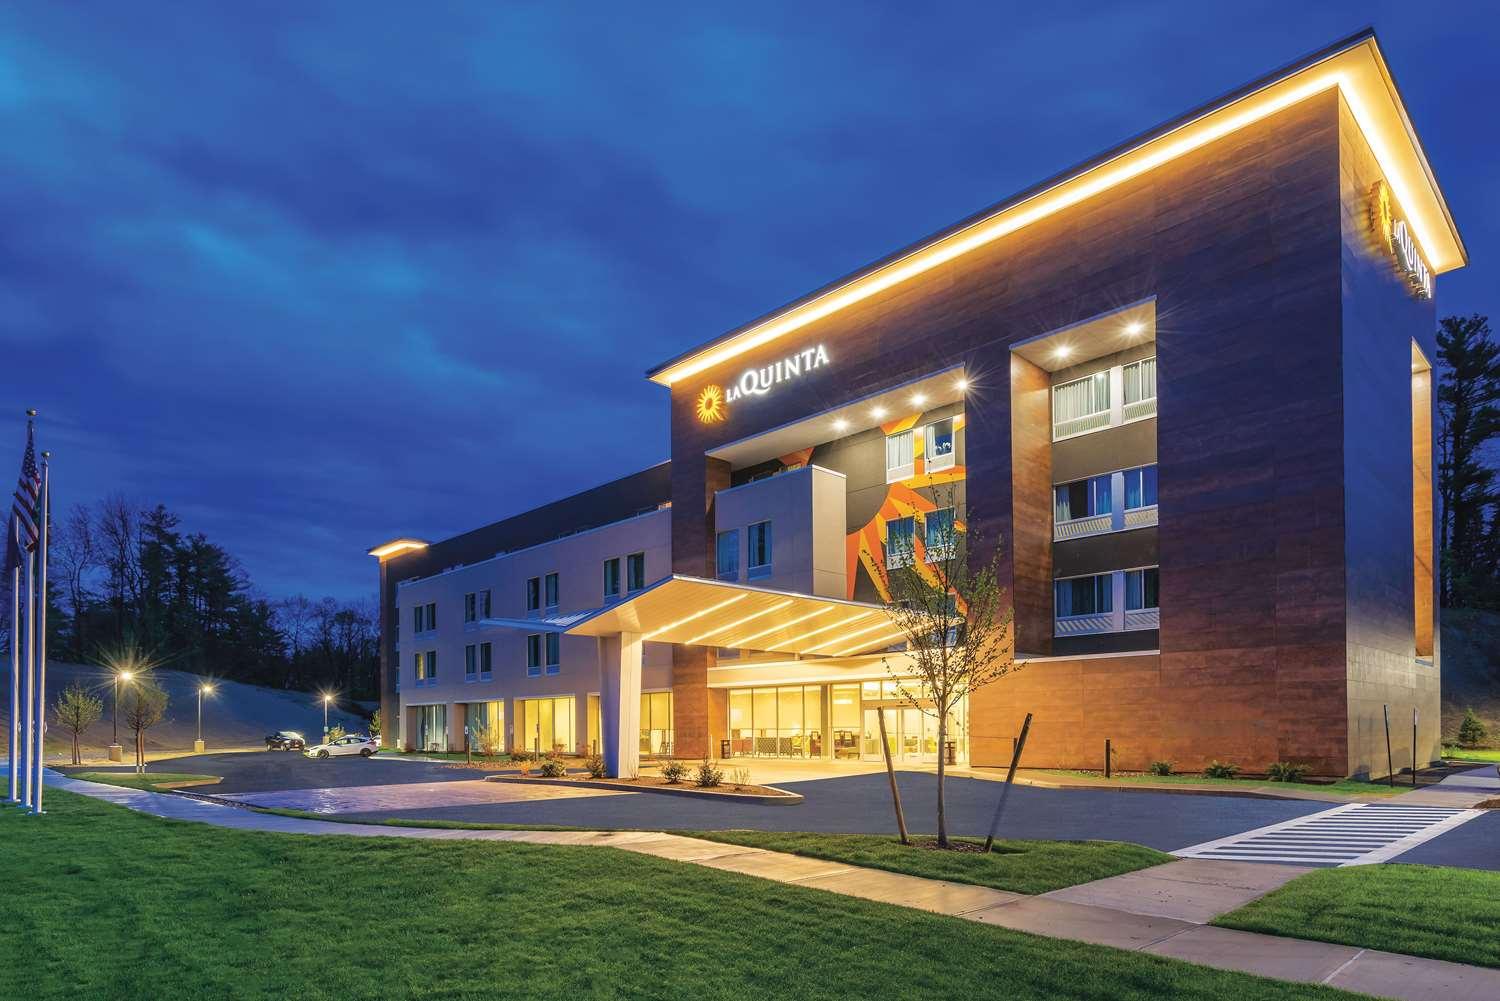 La Quinta Inn & Suites by Wyndham Clifton Park in Clifton Park, NY